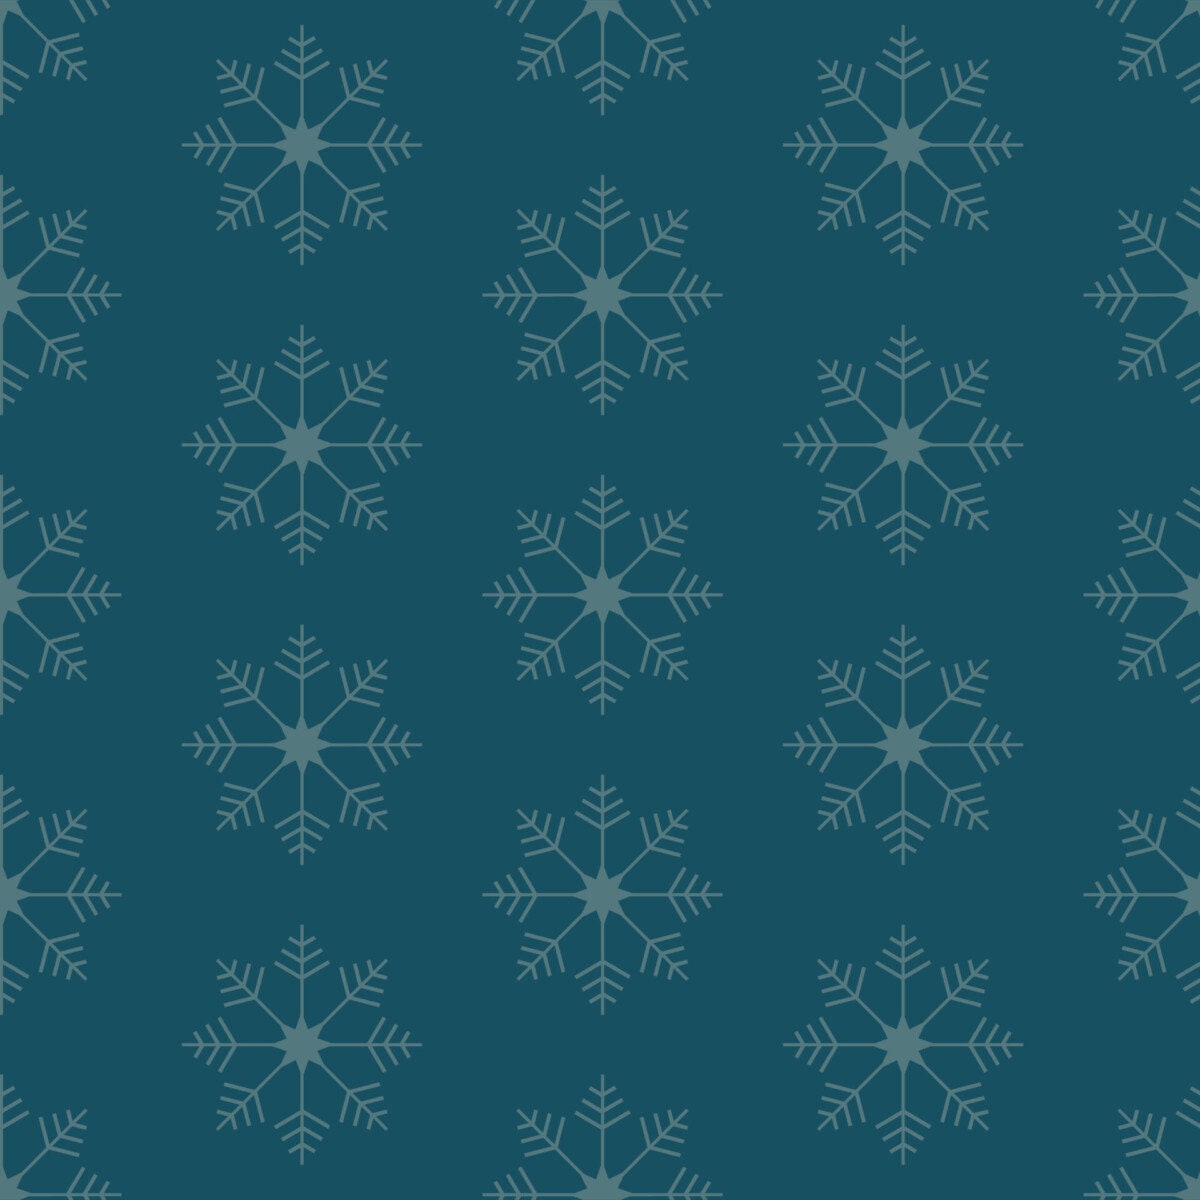 Holiday Patterns 2 XXI, Surface Design